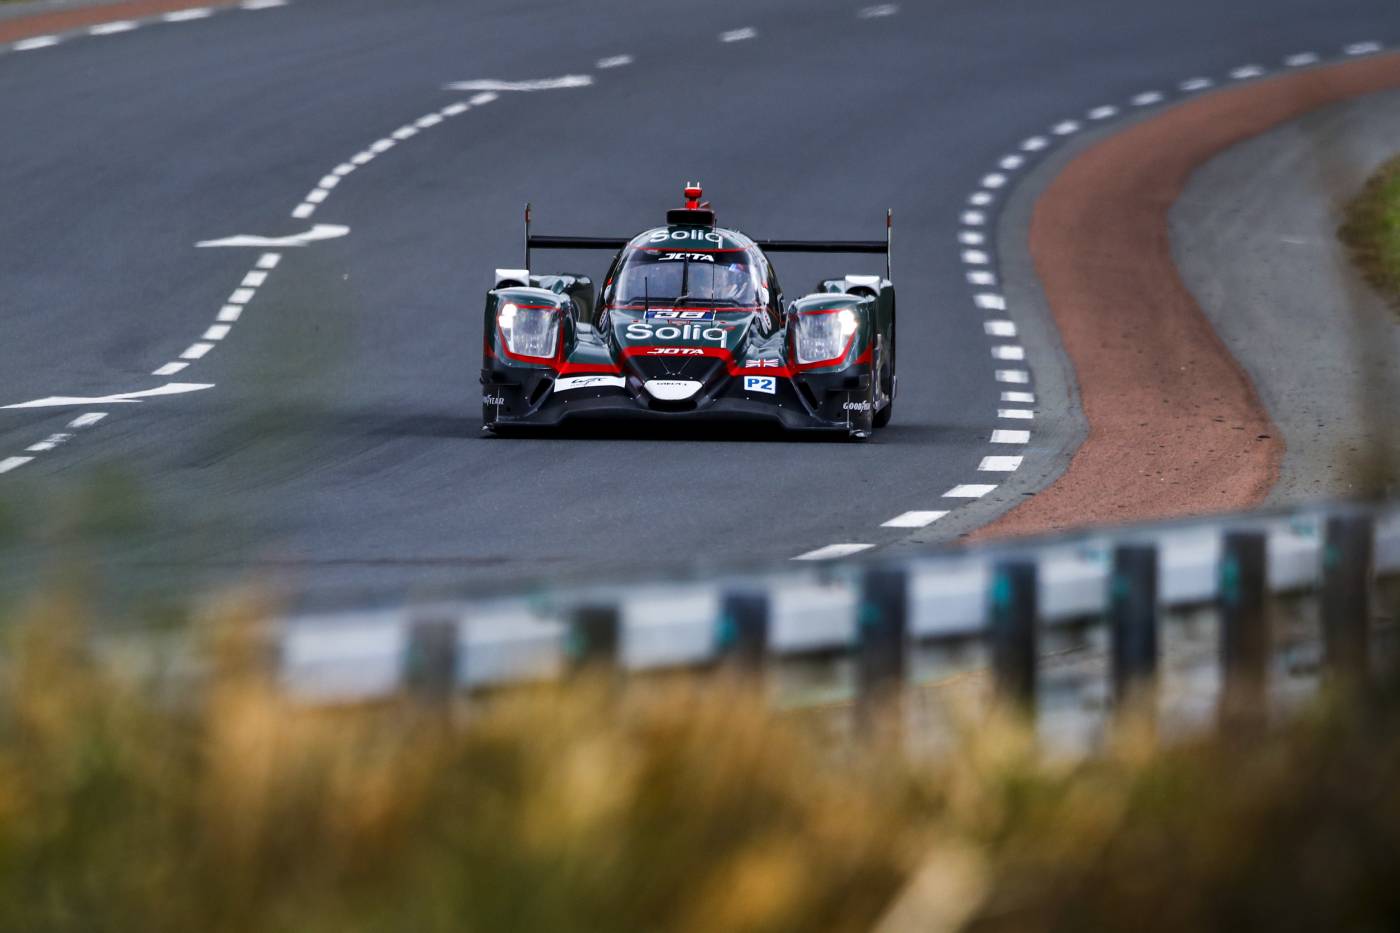 24 Hours of Le Mans Qualifying: JOTA kicks things off!